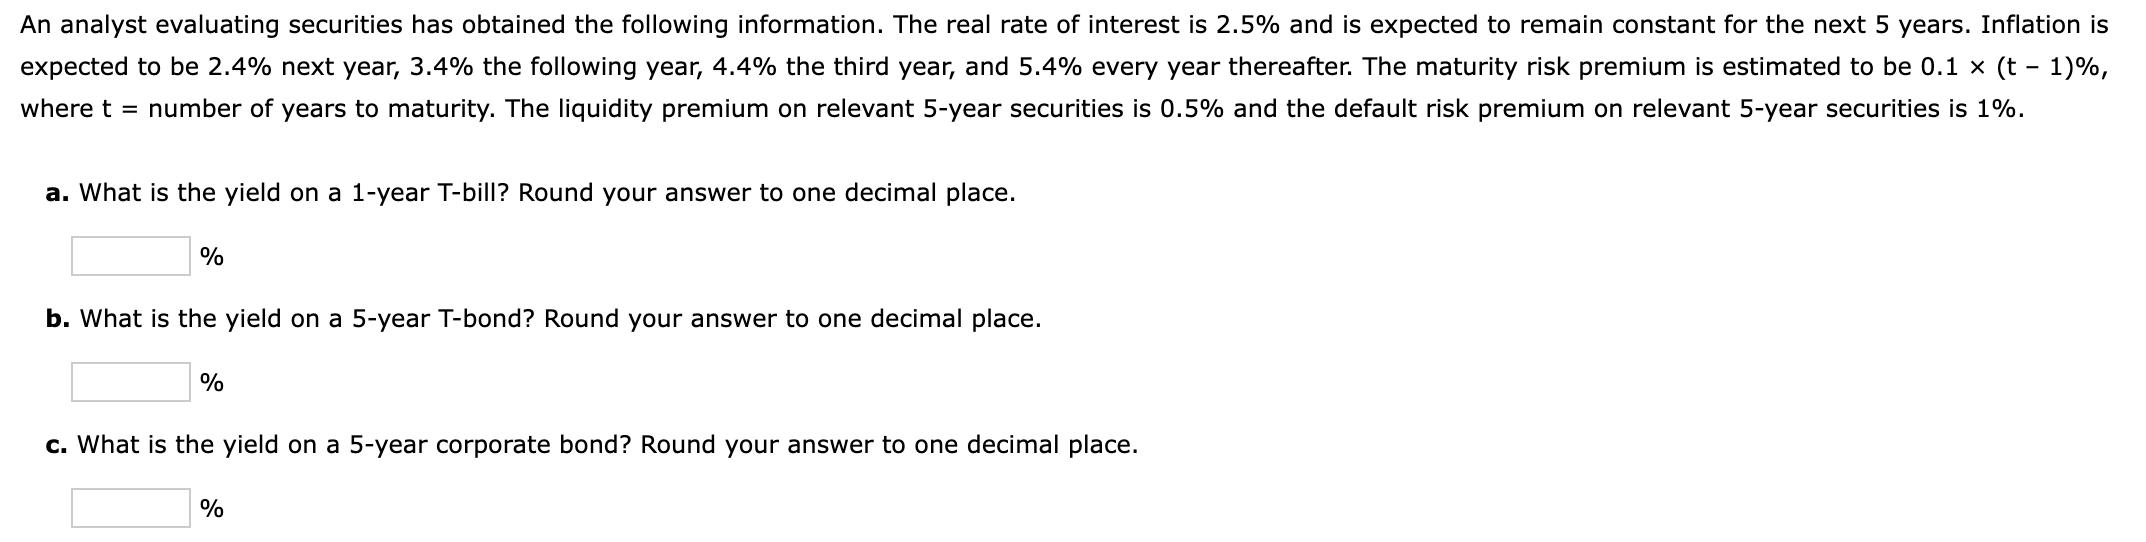 An analyst evaluating securities has obtained the following information. The real rate of interest is ( 2.5 % ) and is exp